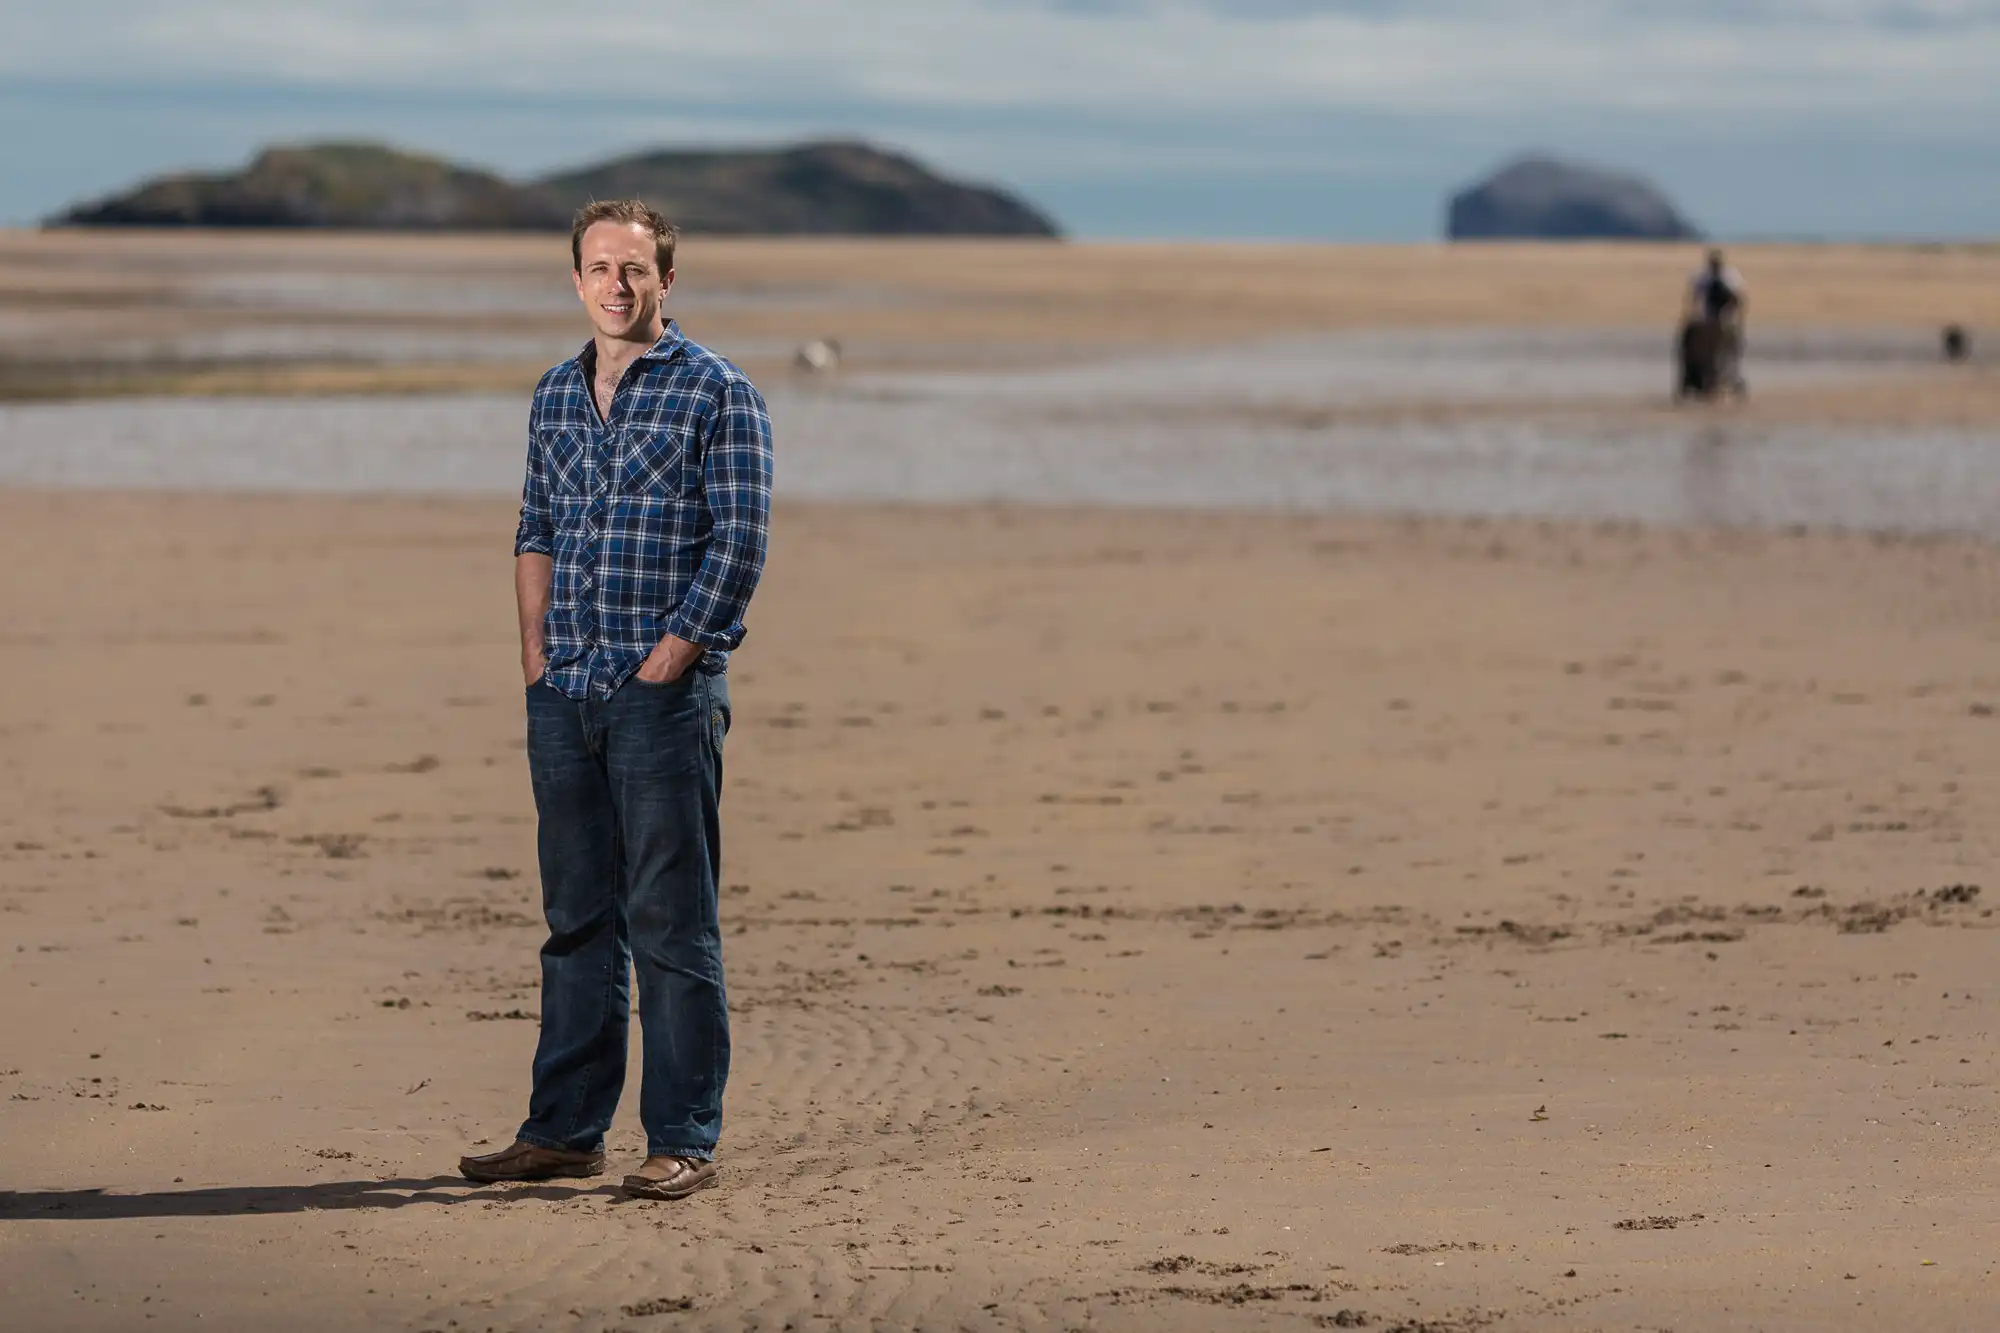 Man in a blue plaid shirt and jeans smiling on a sandy beach with distant islands in the background.